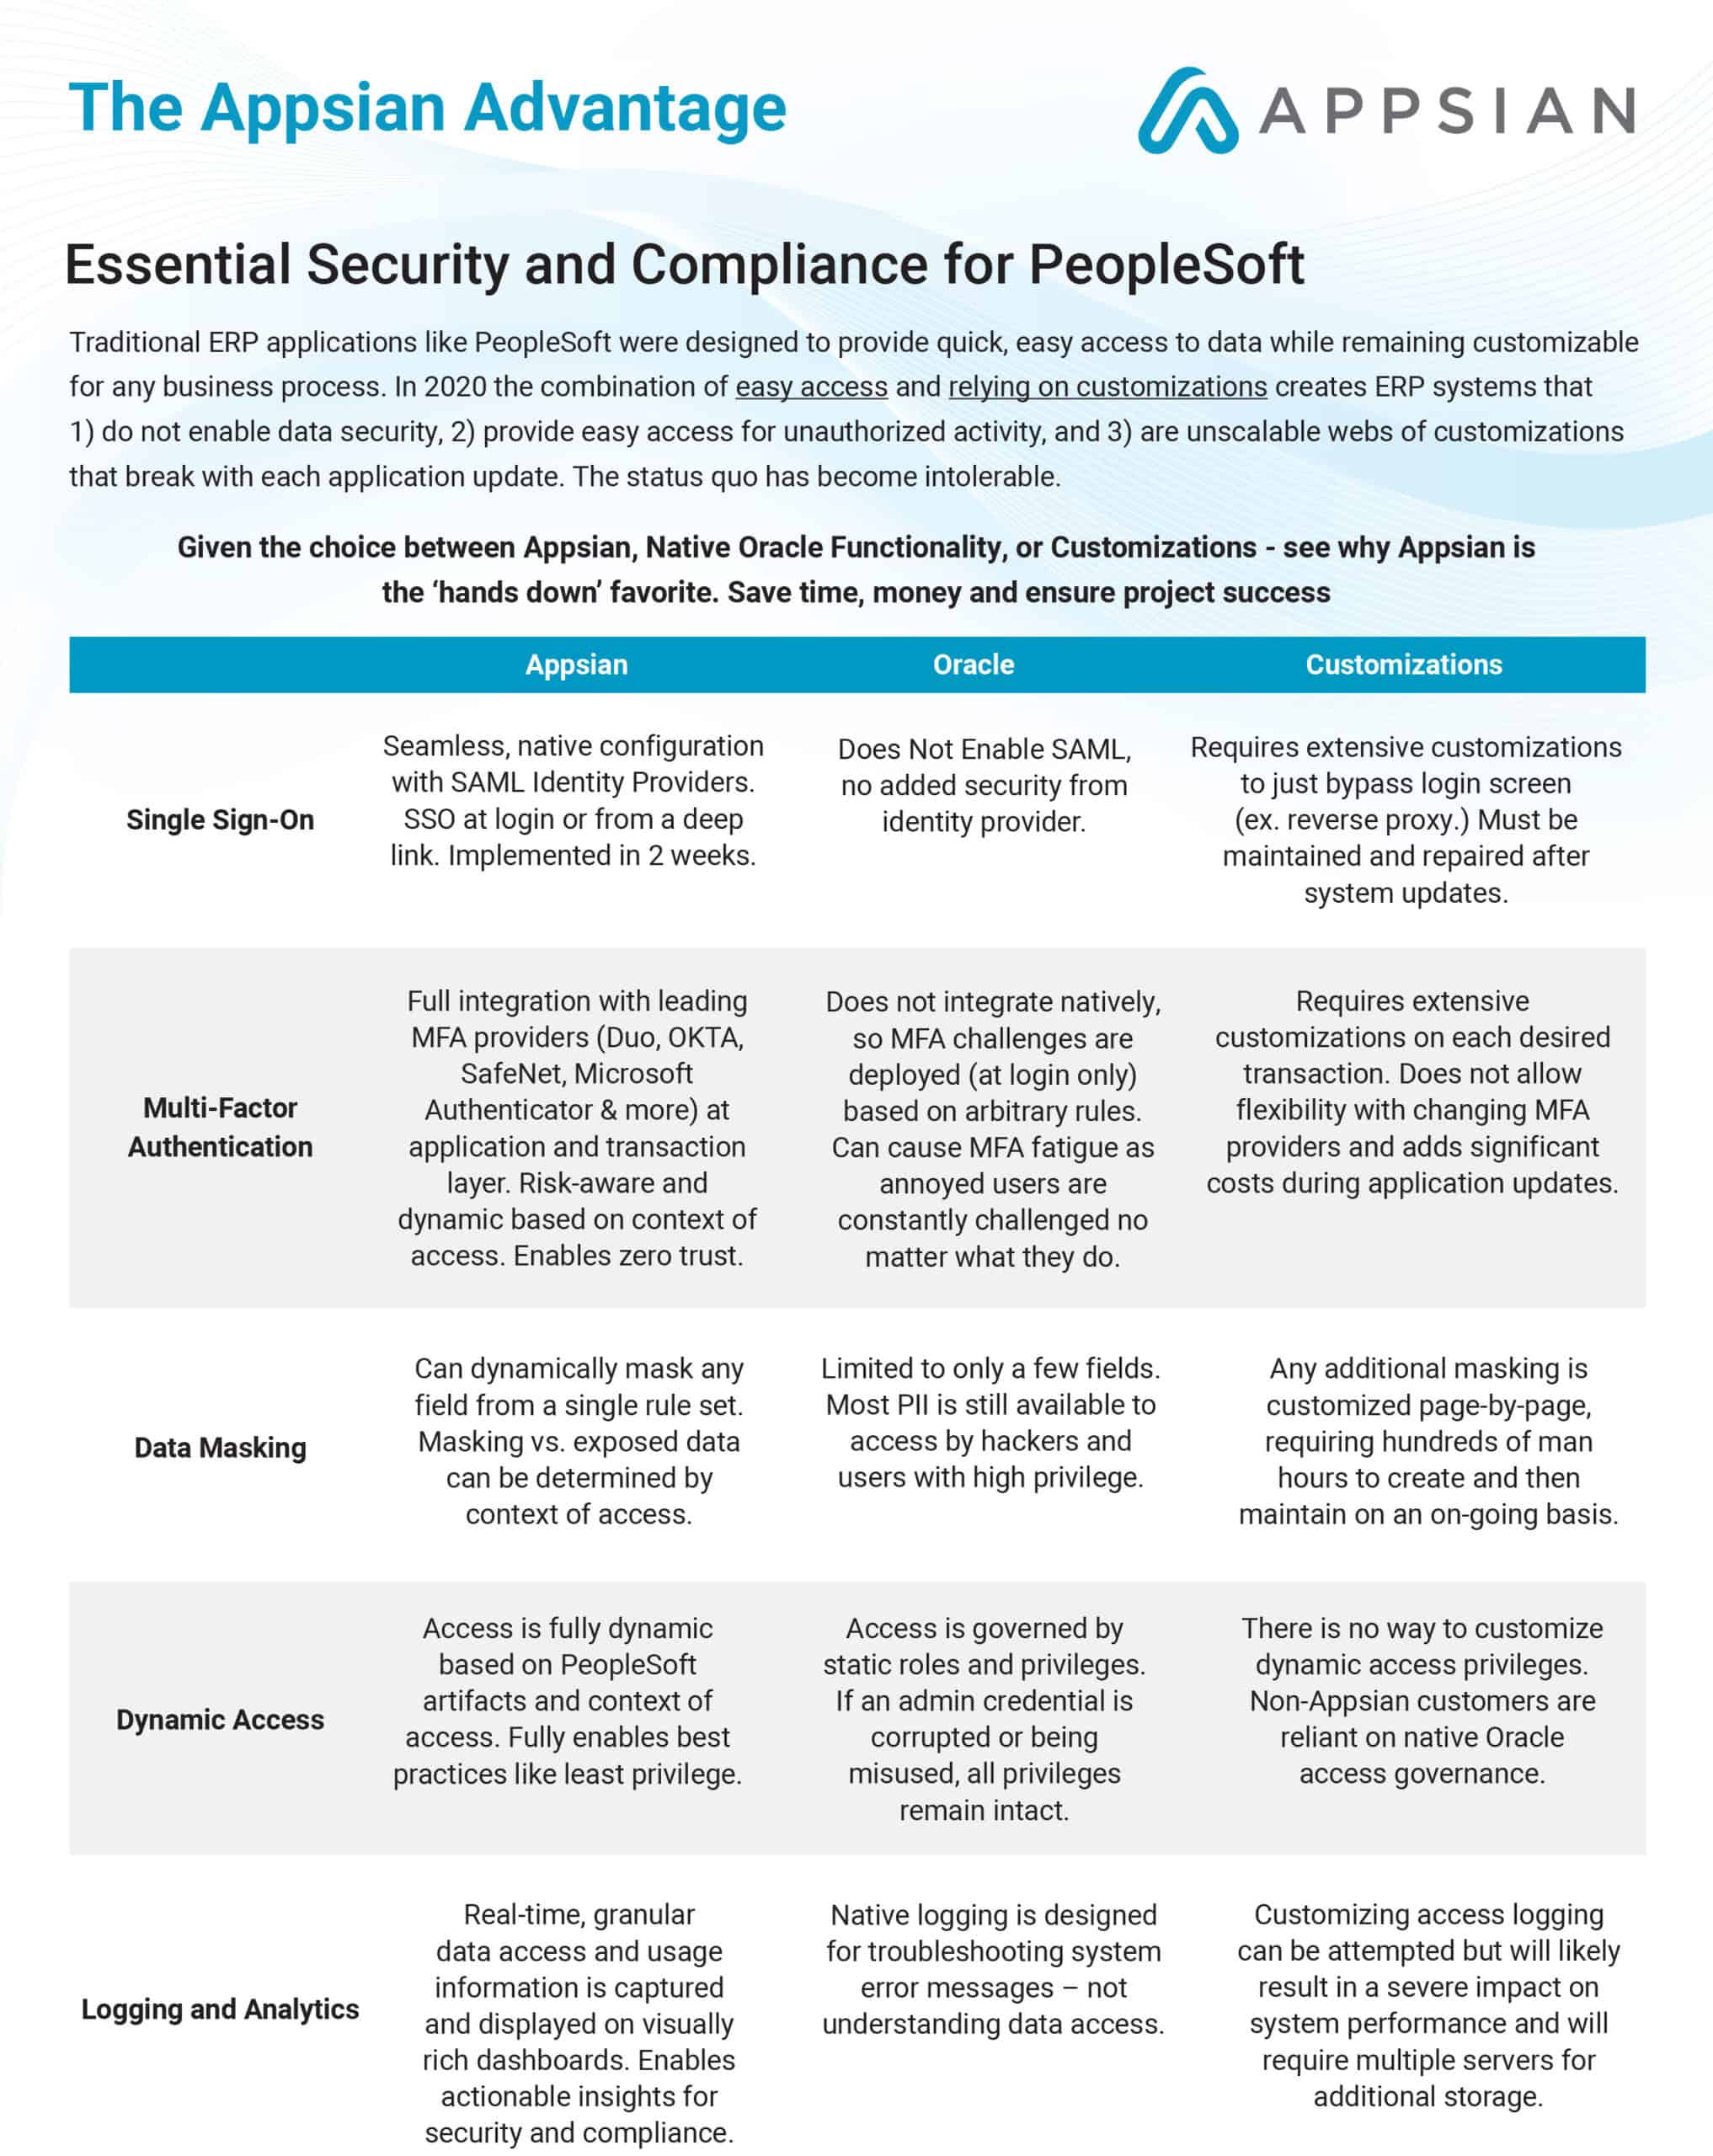 Essential Security and Compliance for PeopleSoft